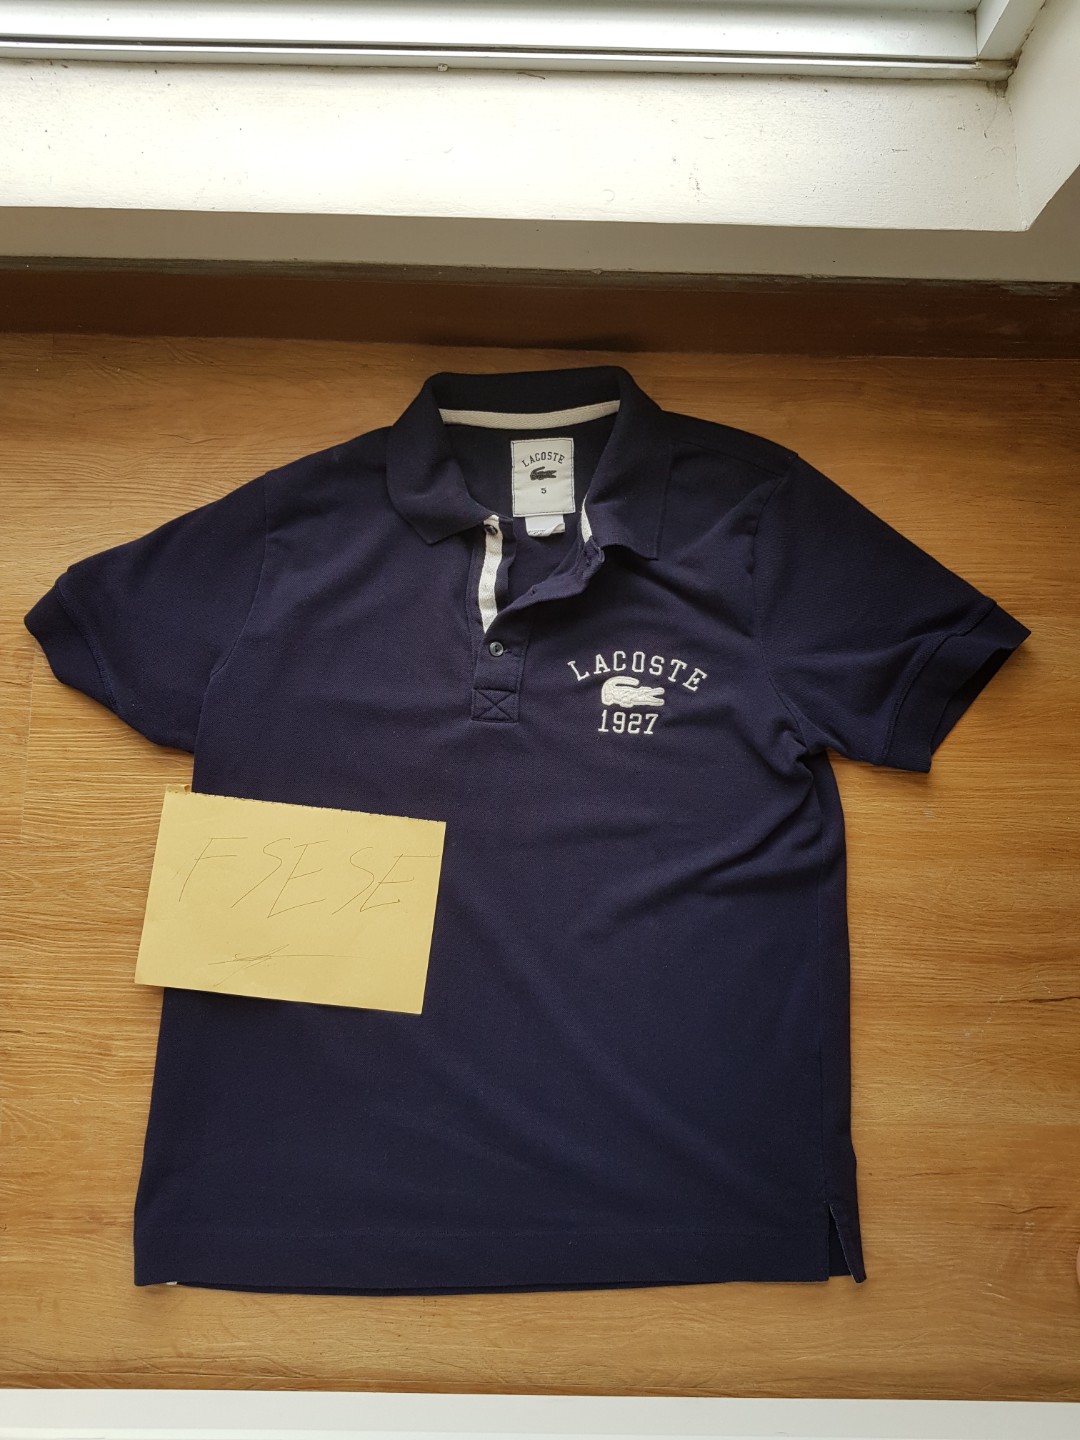 lacoste polo shirt 1927, OFF 72%,Buy!